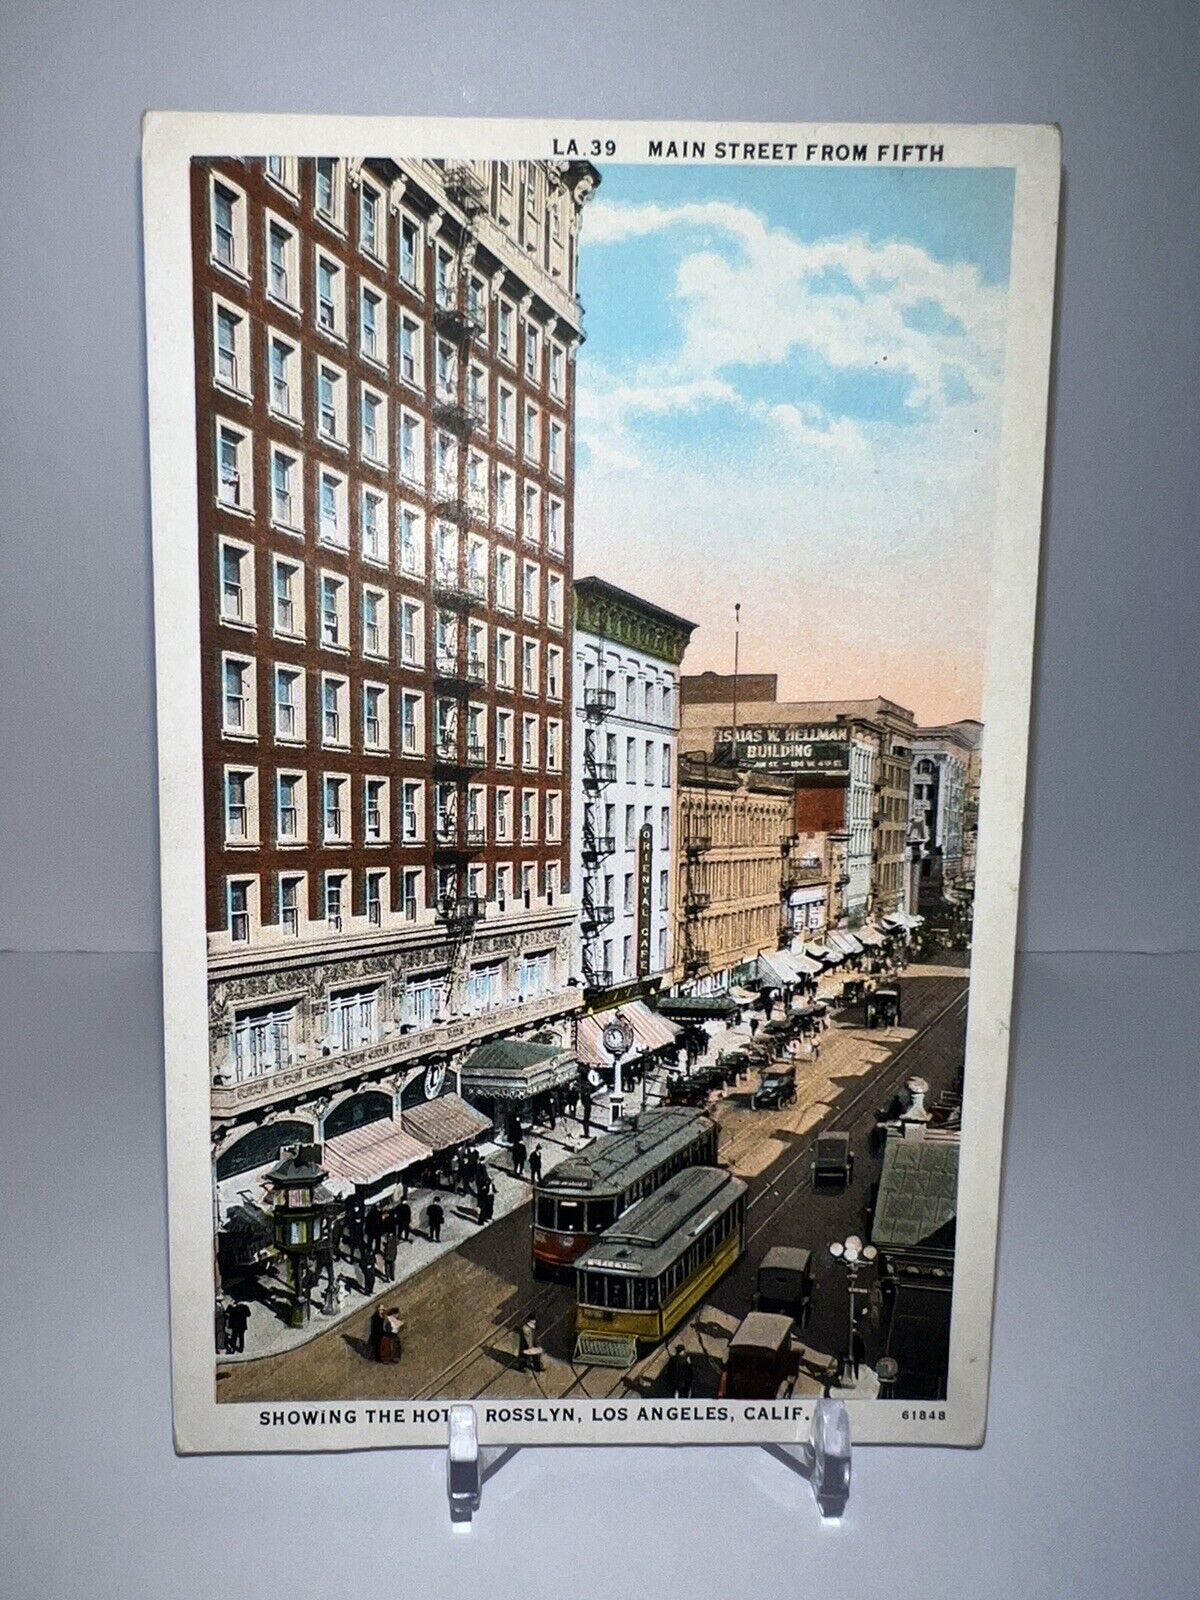 VINTAGE 1920 MAIN STREET FROM FIFTH THE HOTEL ROSSLYN LOS ANGELES CALIF. TROLLEY